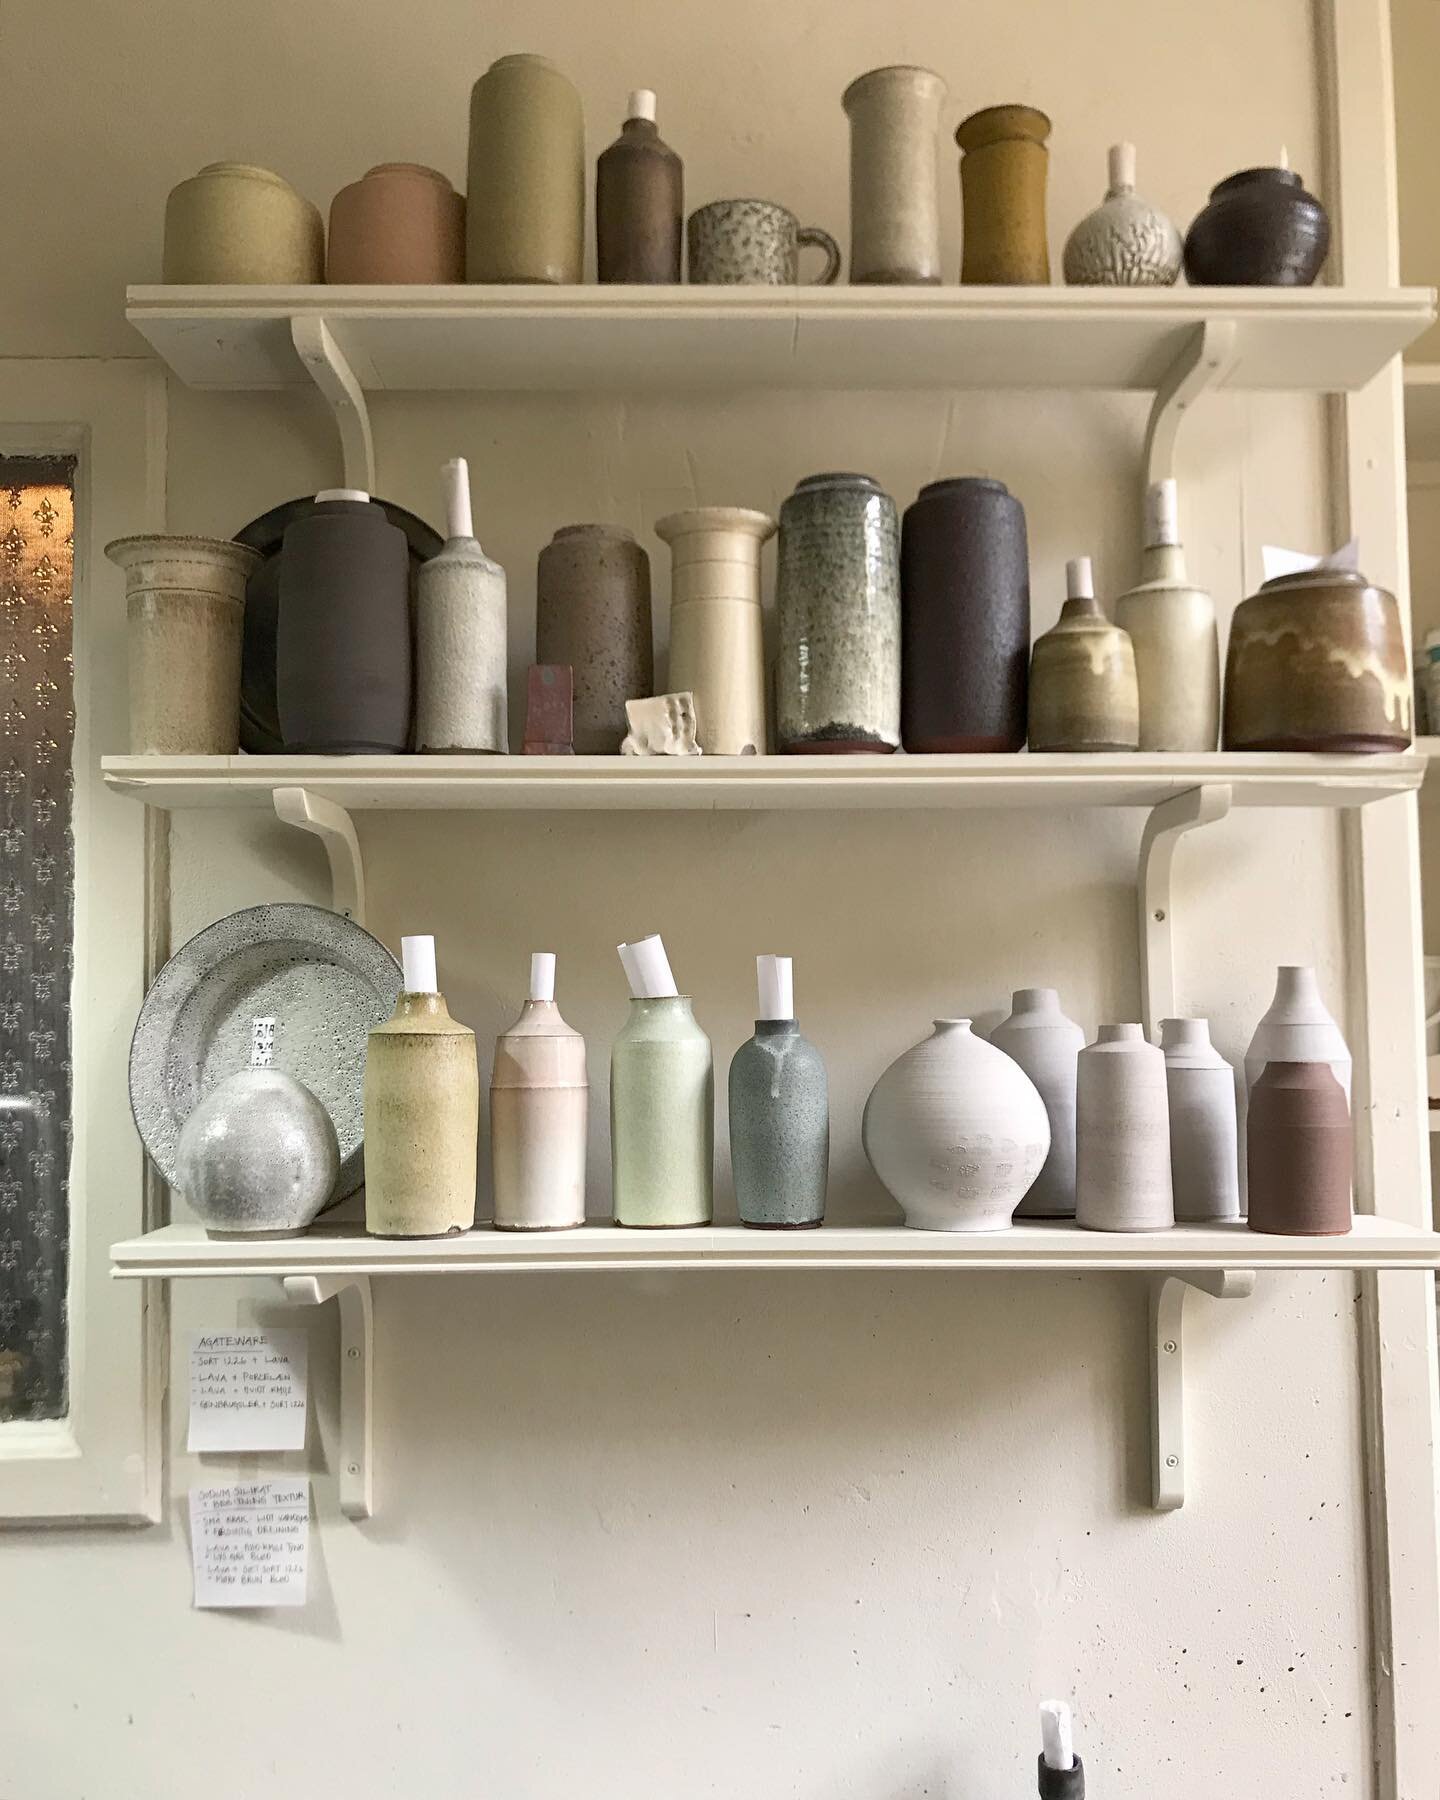 .
Glaze cabinet of curiousities!
My Corona-project - remember?
I&rsquo;m allmost there..
Different clay shapes, wearing each of my glazes, little notes with recipes, tricks for getting it just right, firing scedules and all that jazzz .... should get